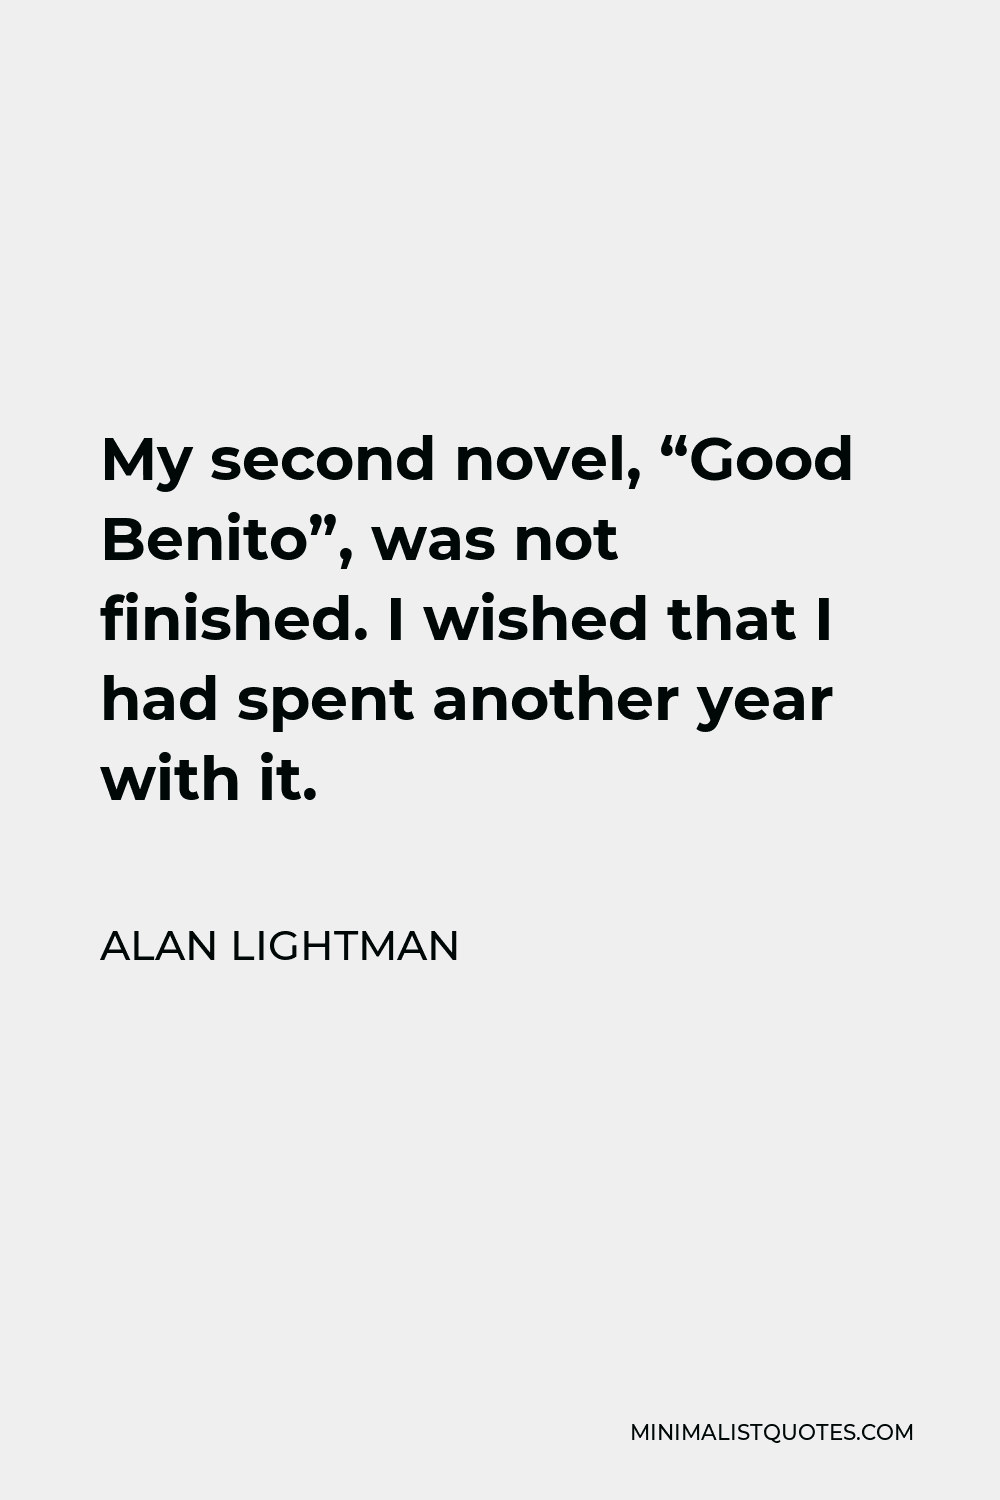 Alan Lightman Quote - My second novel, “Good Benito”, was not finished. I wished that I had spent another year with it.